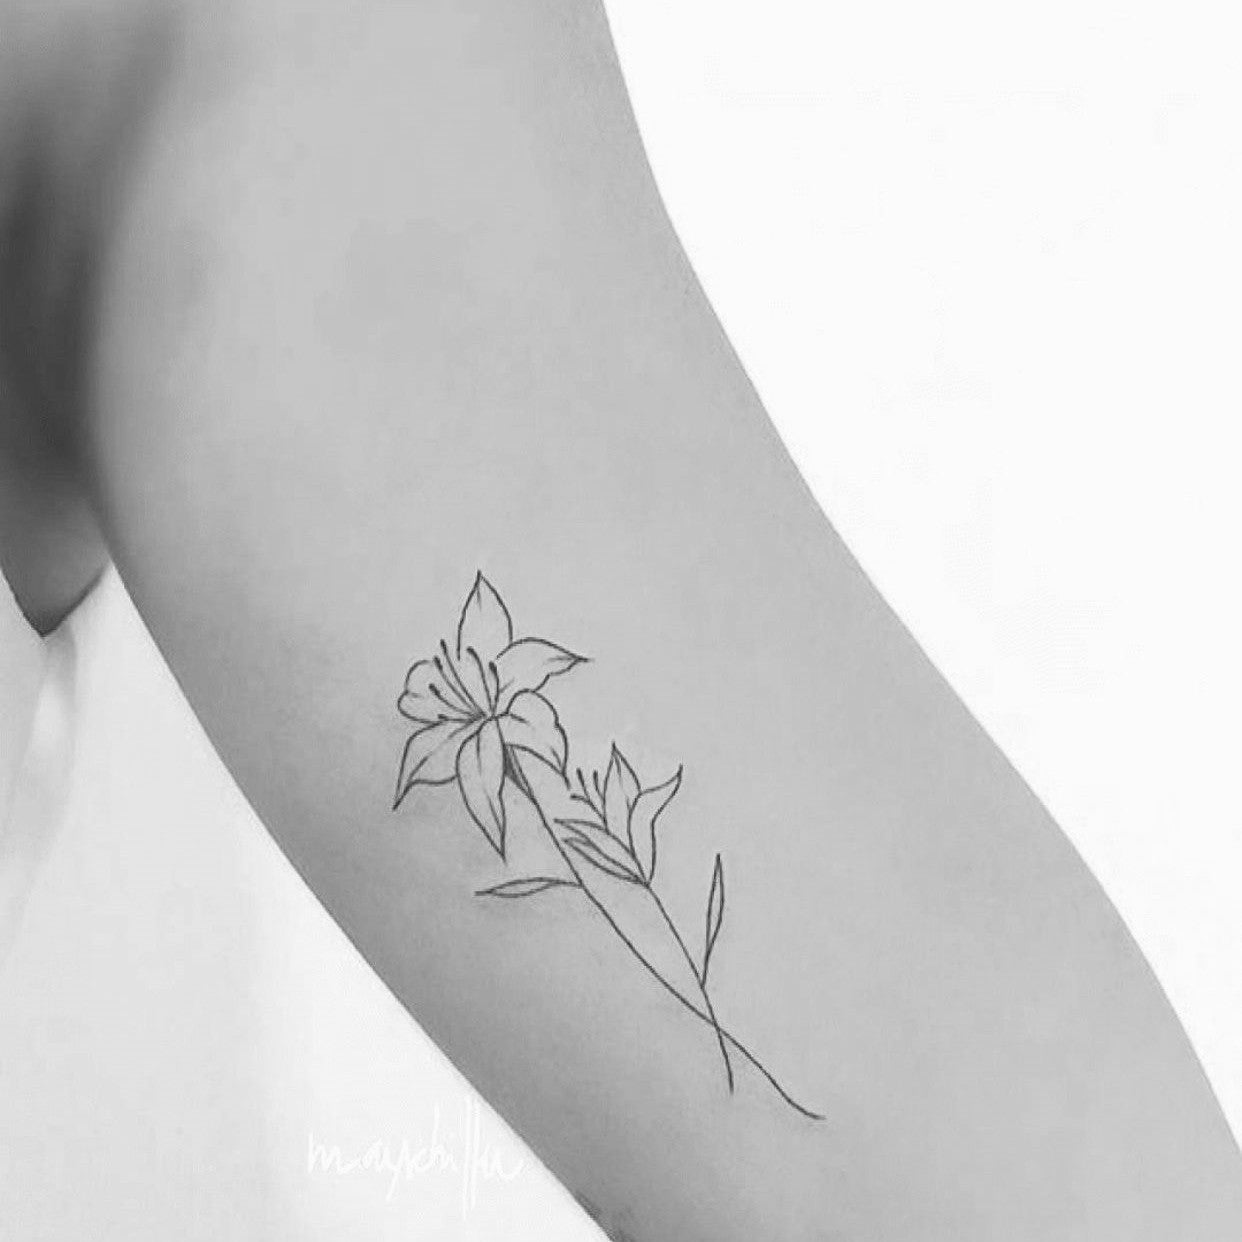 Narcissus flower tattoo meaning